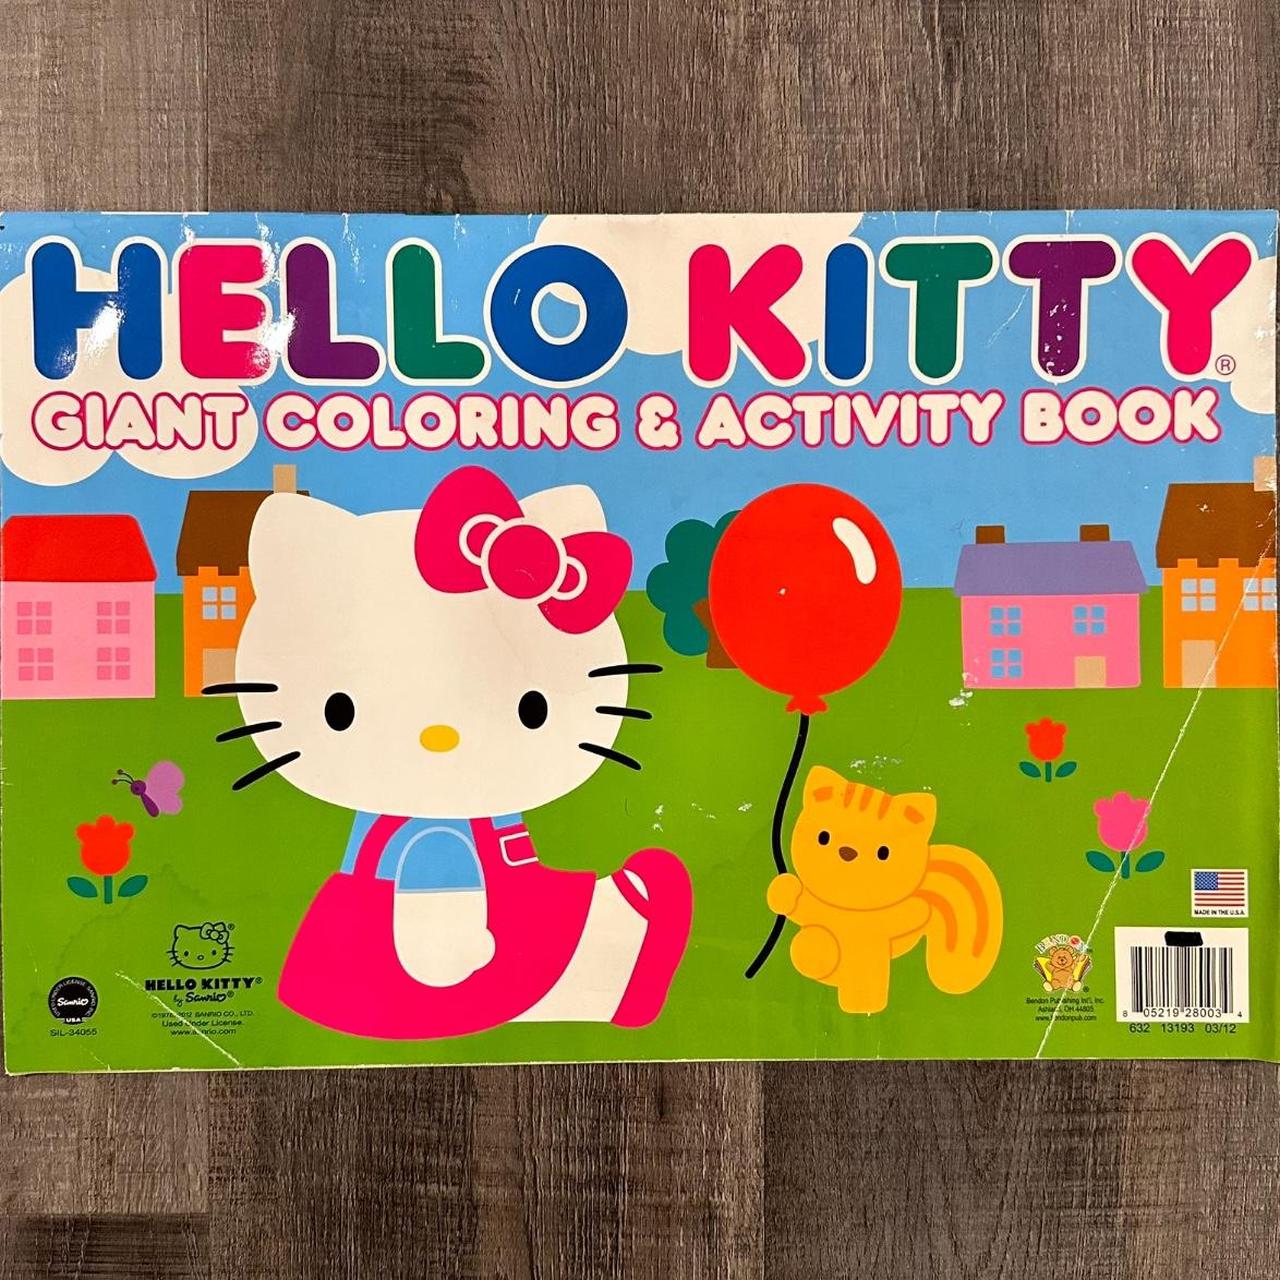 Hello Kitty Giant Coloring and Activity Book